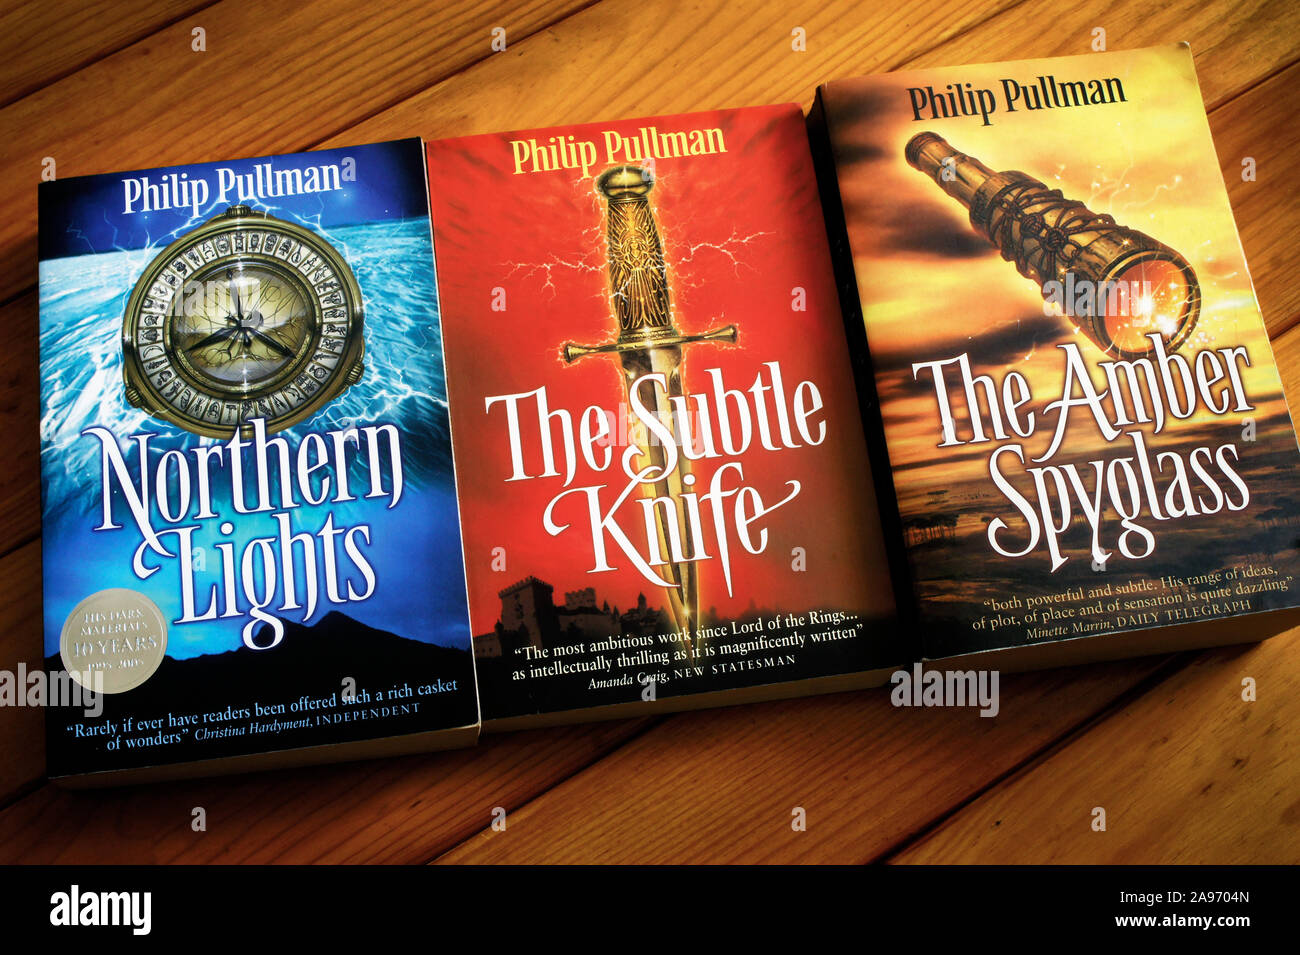 Philip Pullman His Dark Materials Trilogy. Closeup of Northern Lights, The Subtle Knife and The Amber Spyglass on a wooden table. Scholastic editions Stock Photo